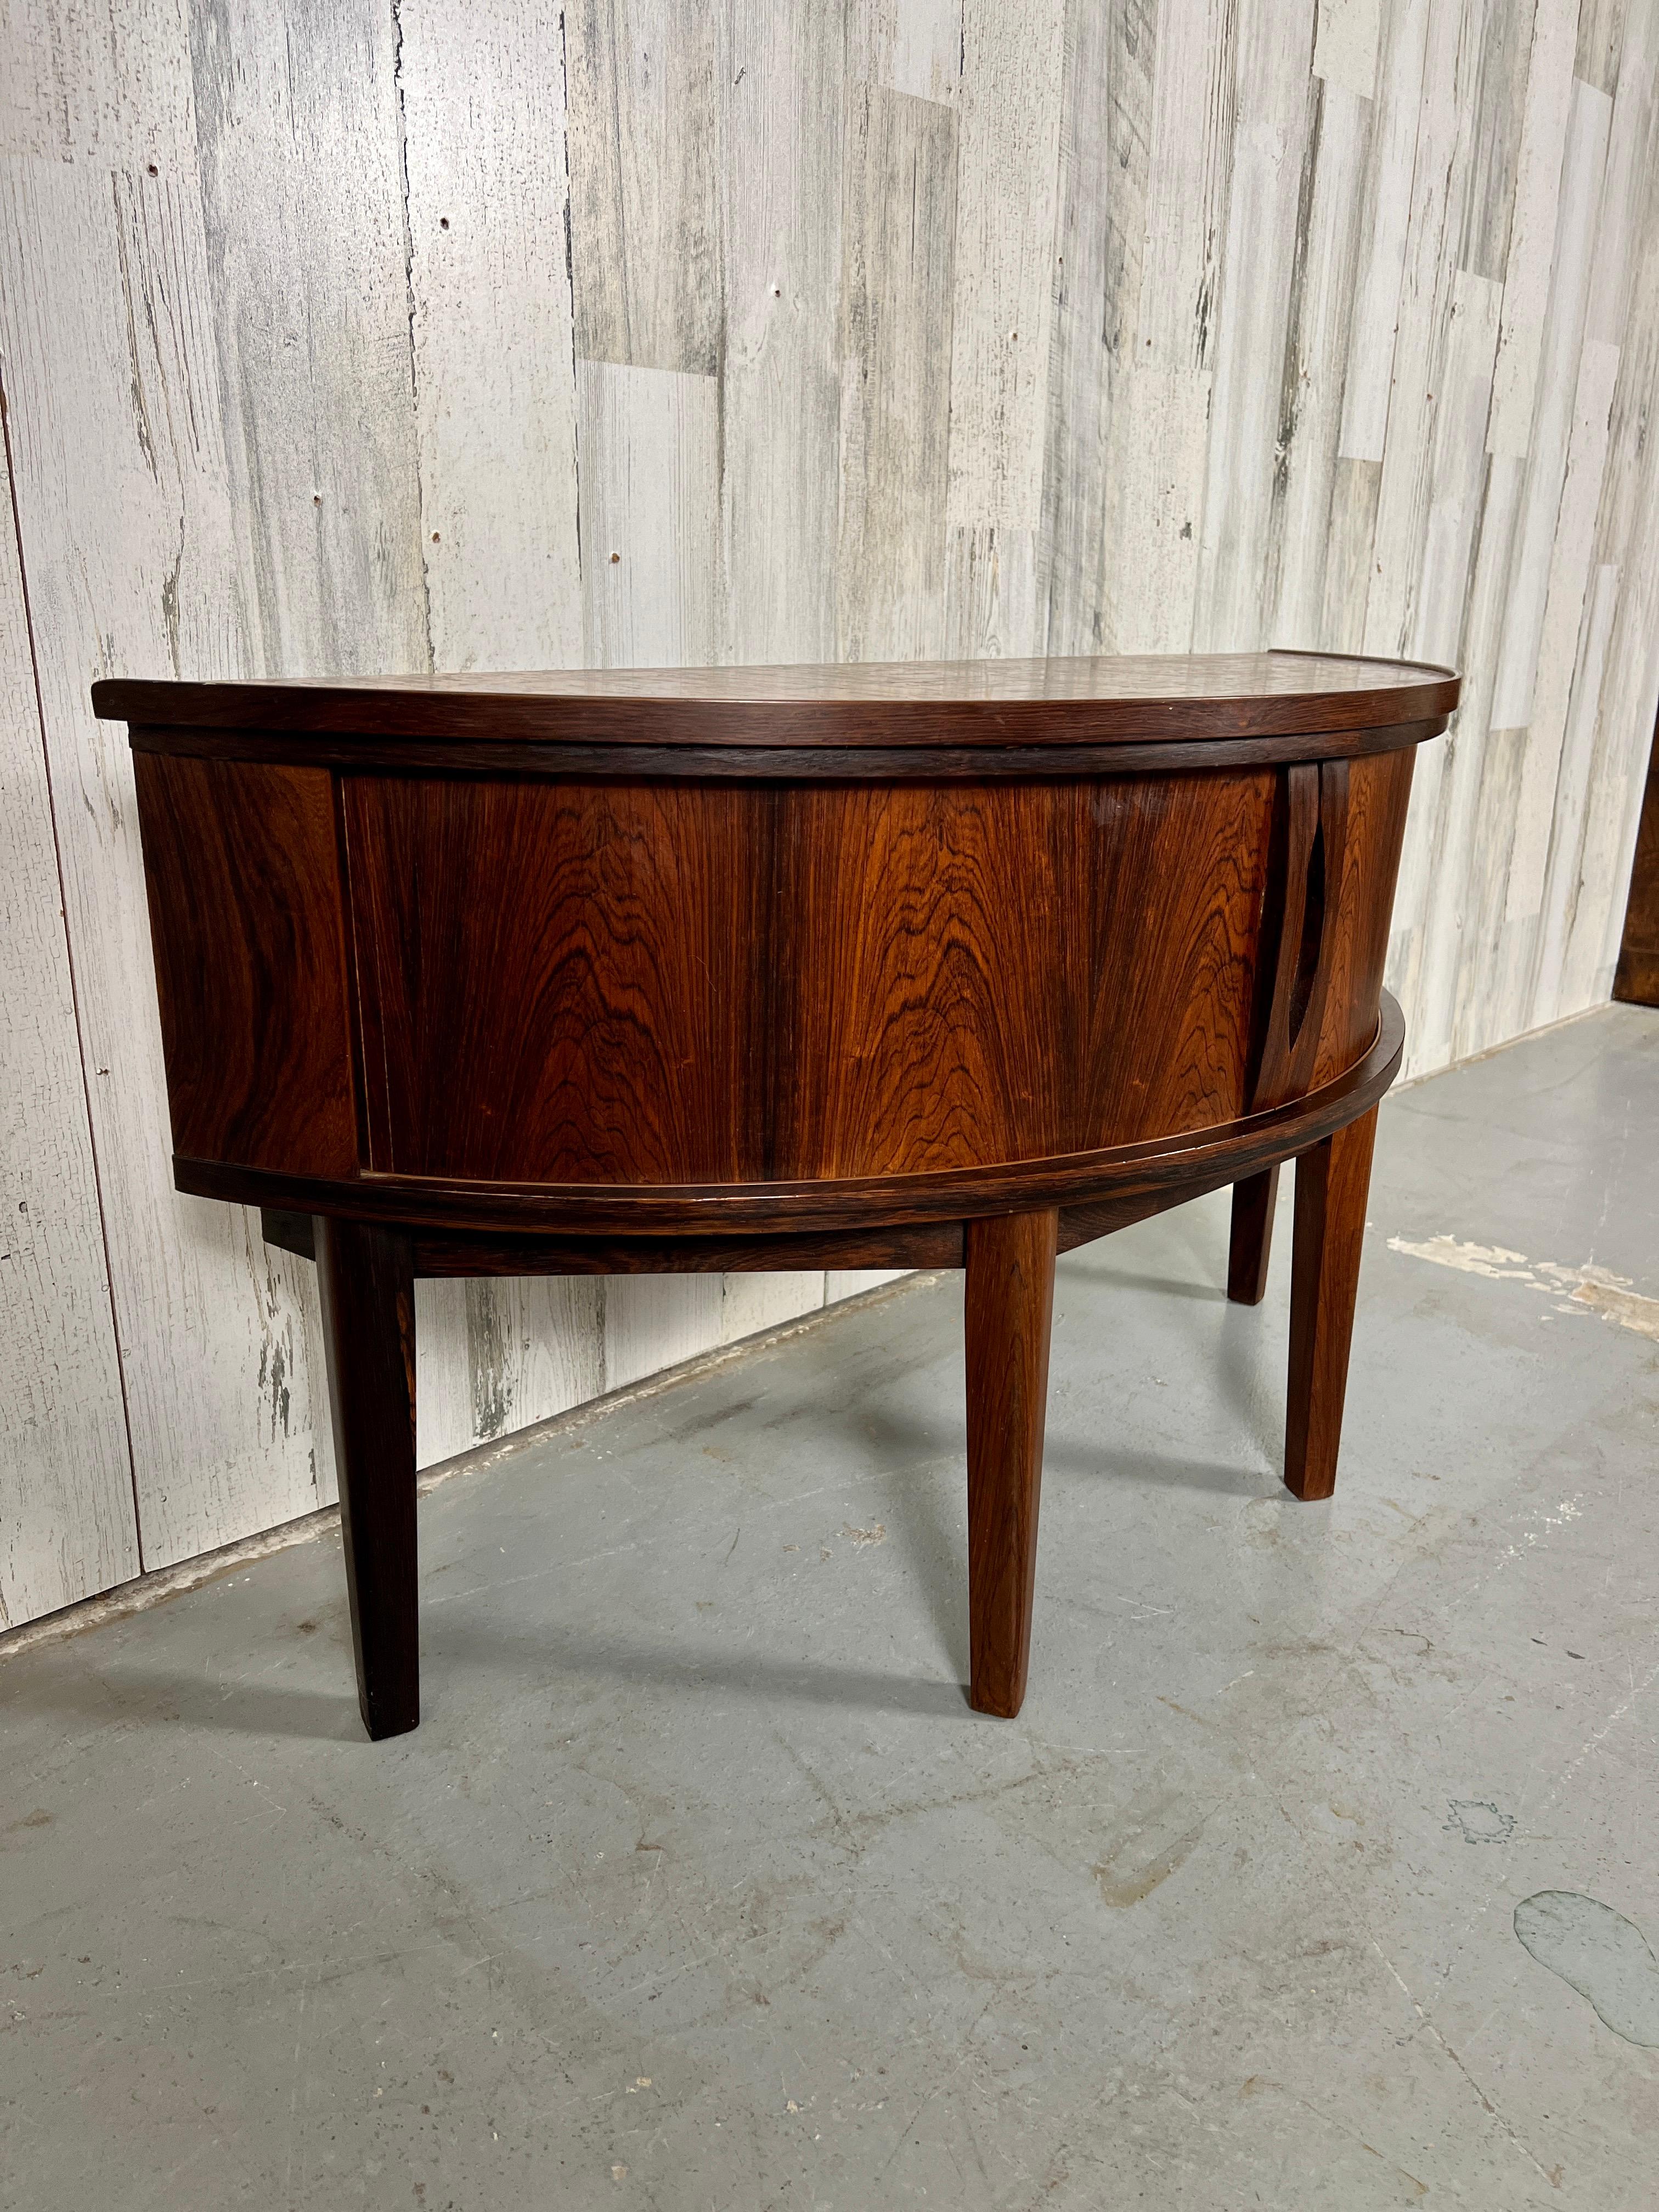 Danish Modern Demi Lune Table In Good Condition For Sale In Denton, TX